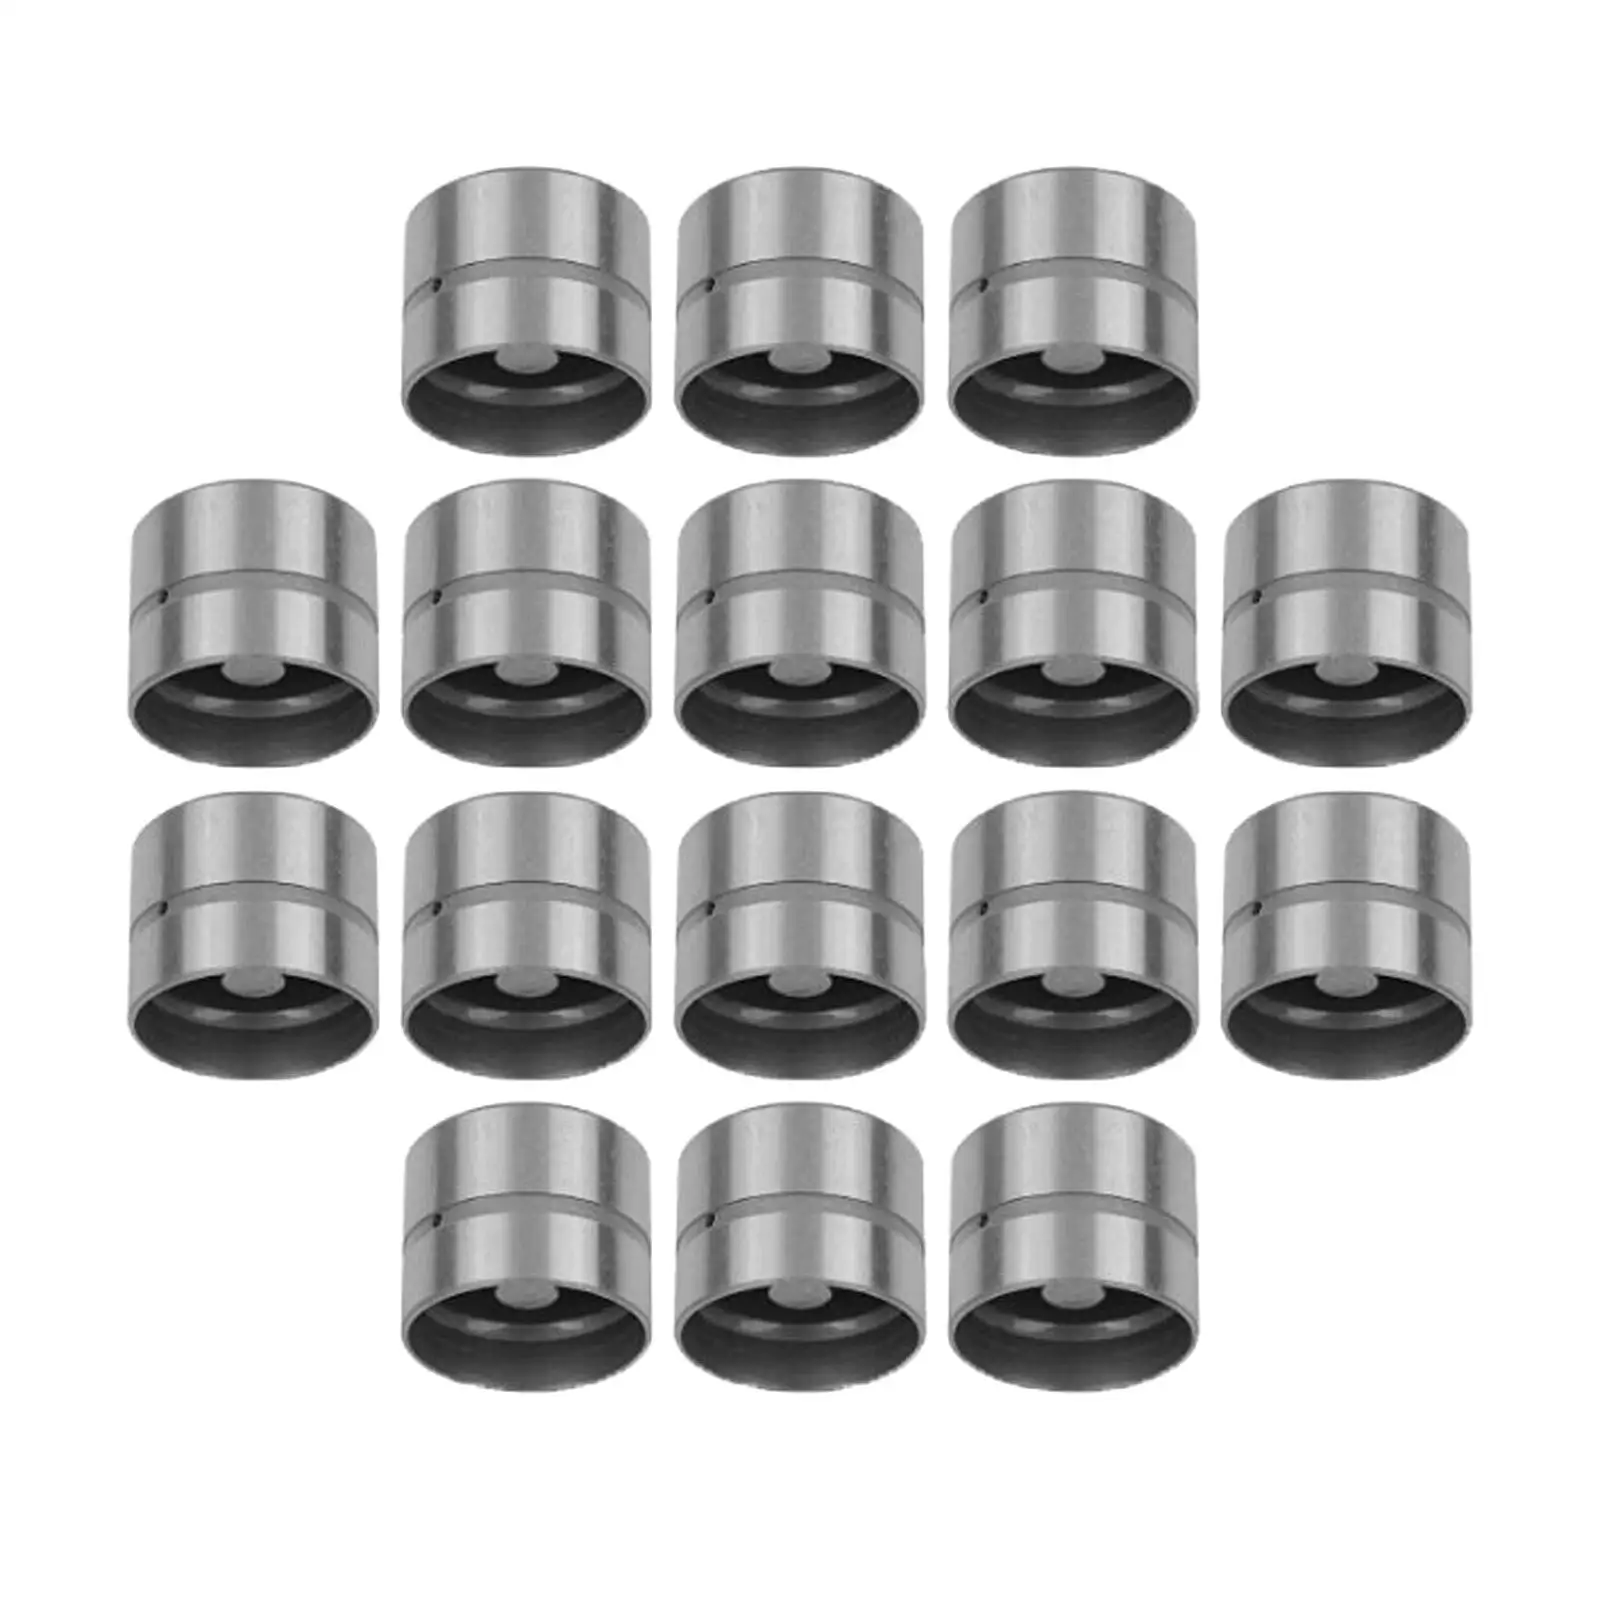 

Set of 16 Hydraulic Tappets Replaces 420011810 for C16XE Z14XE Z16XE Z18XE X30XE Professional High Performance